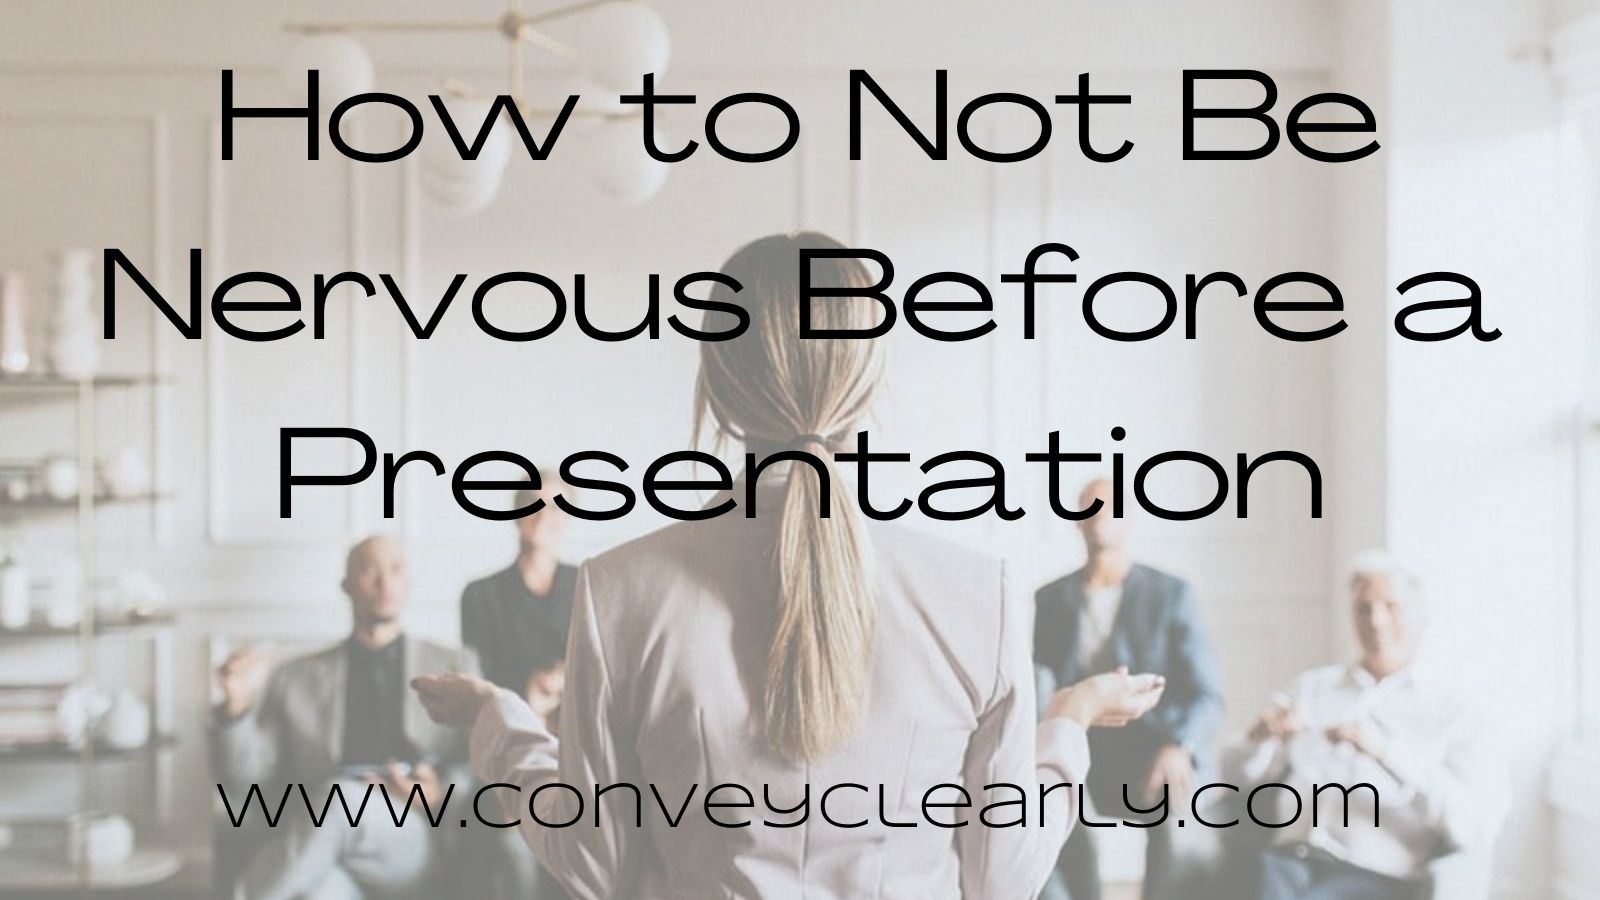 how to do presentation without being nervous